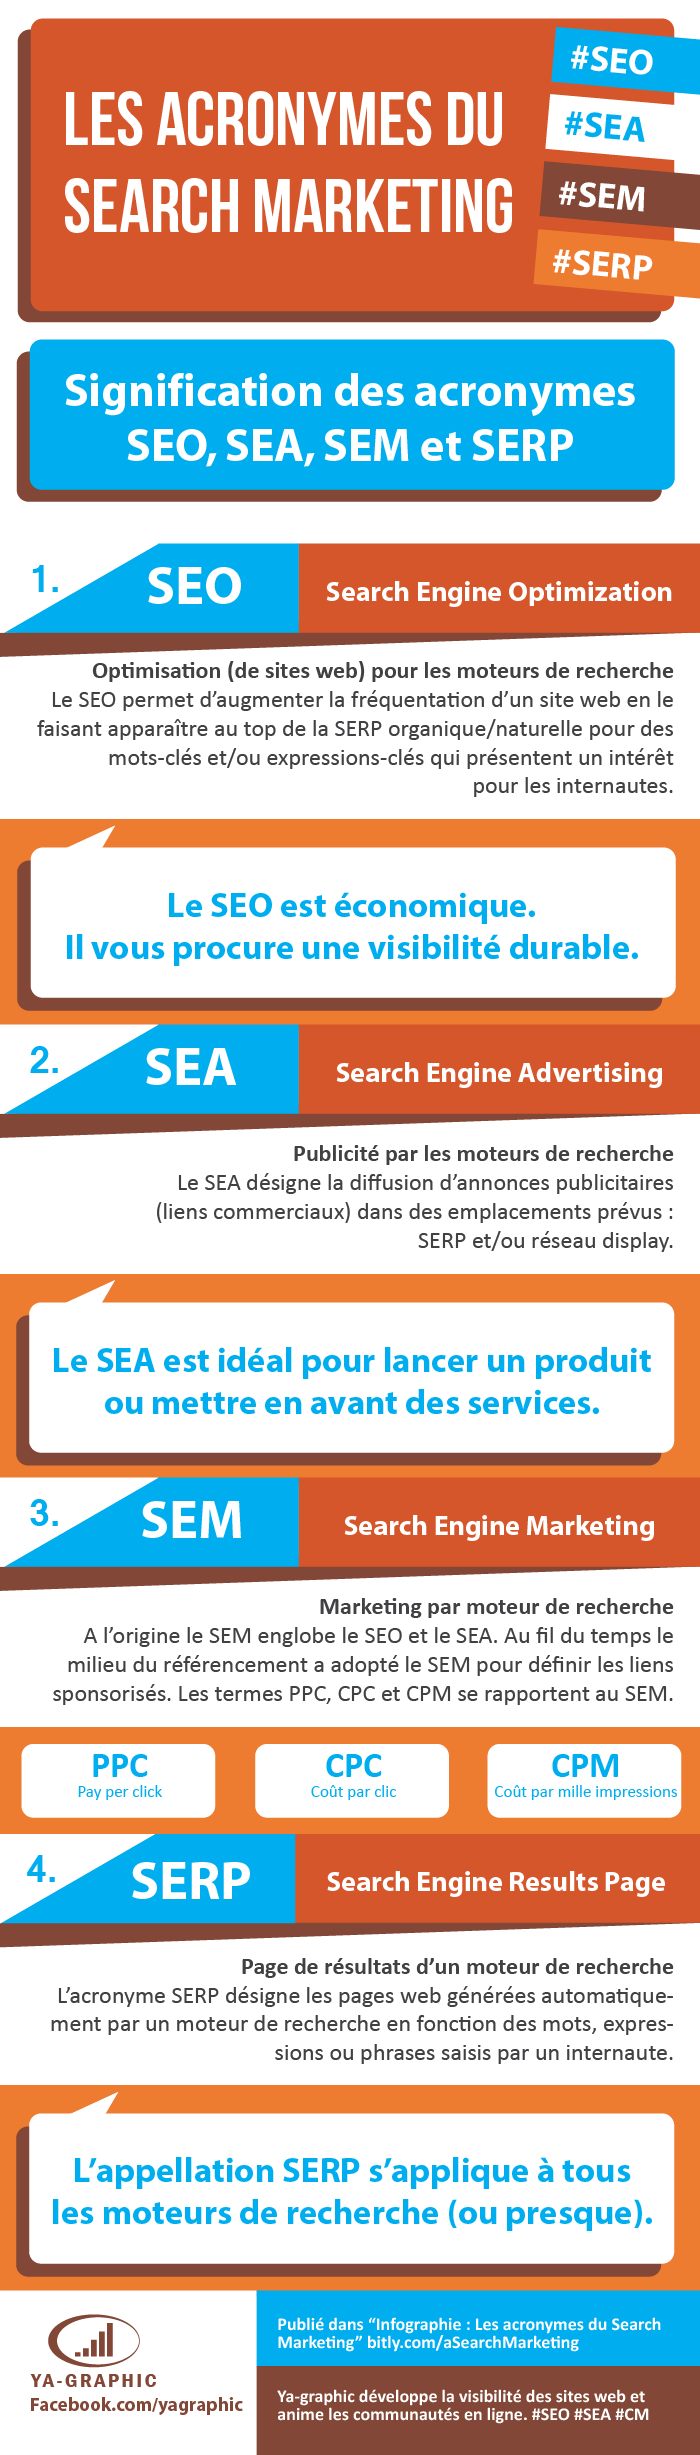 Infographie : acronymes du Search Marketing